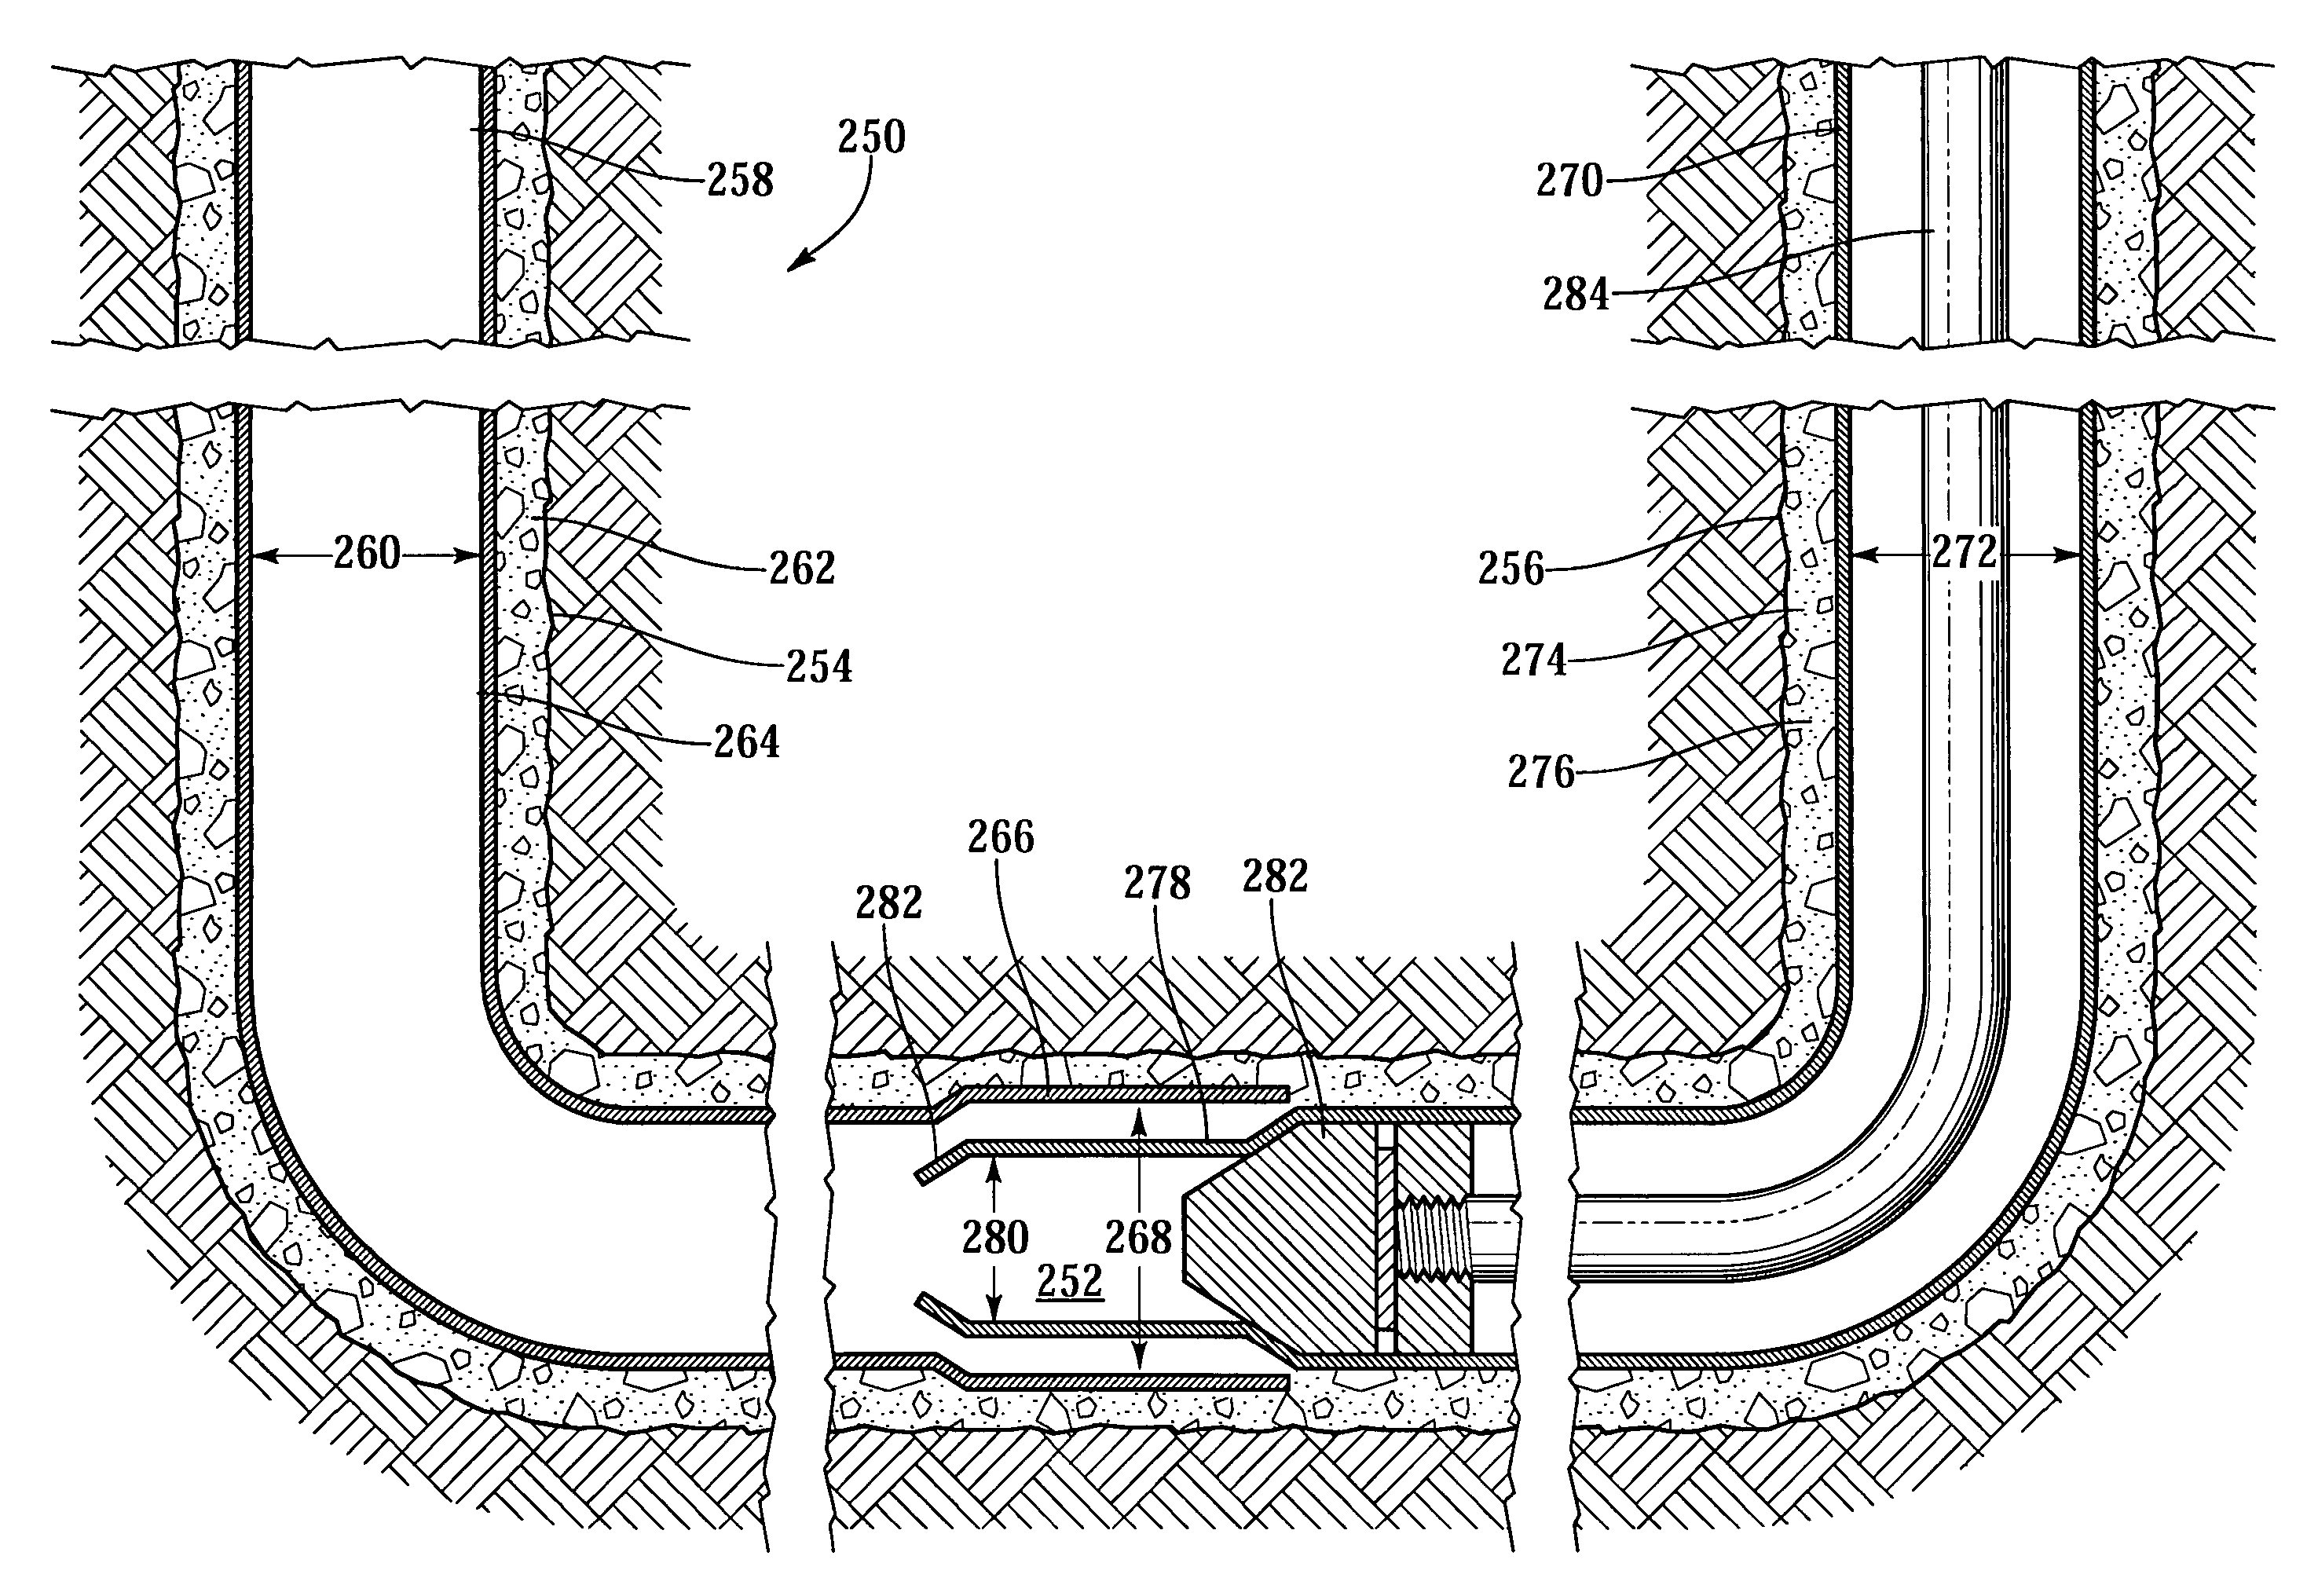 Monobore wellbore and method for completing same